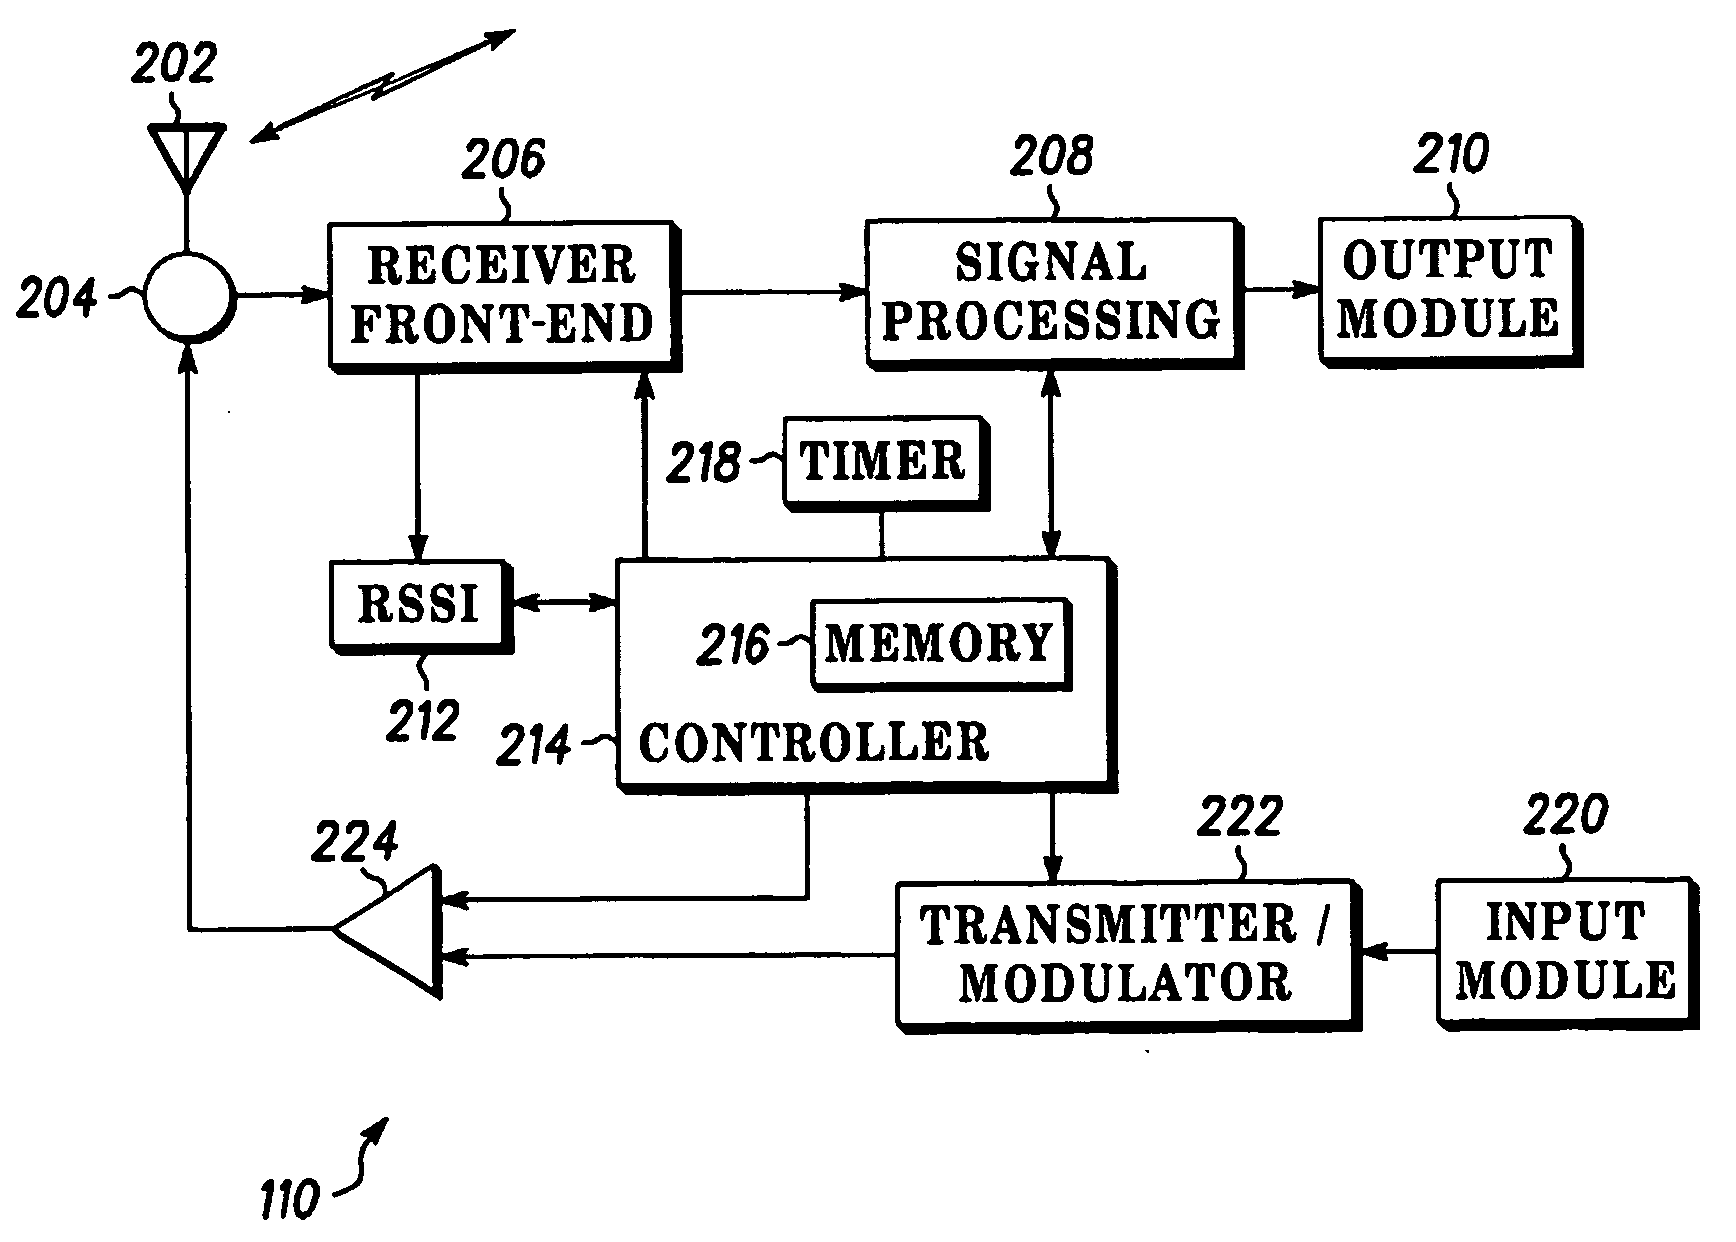 Power amplifier transient compensation in ofdm systems